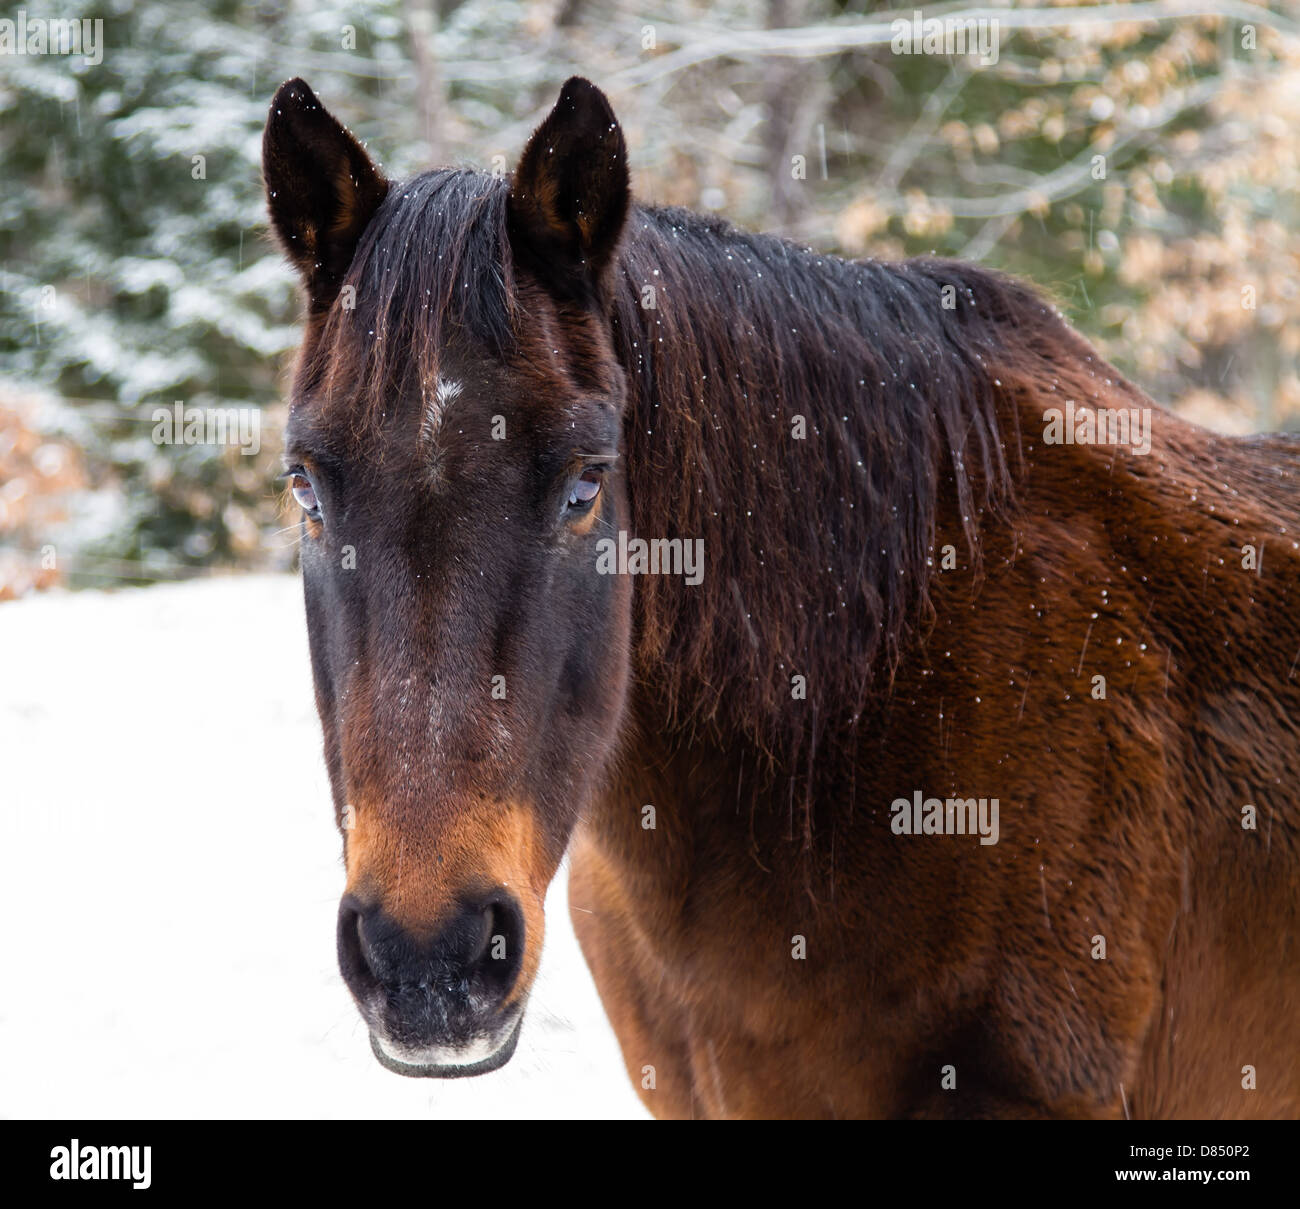 Brown horse in winter. Stock Photo